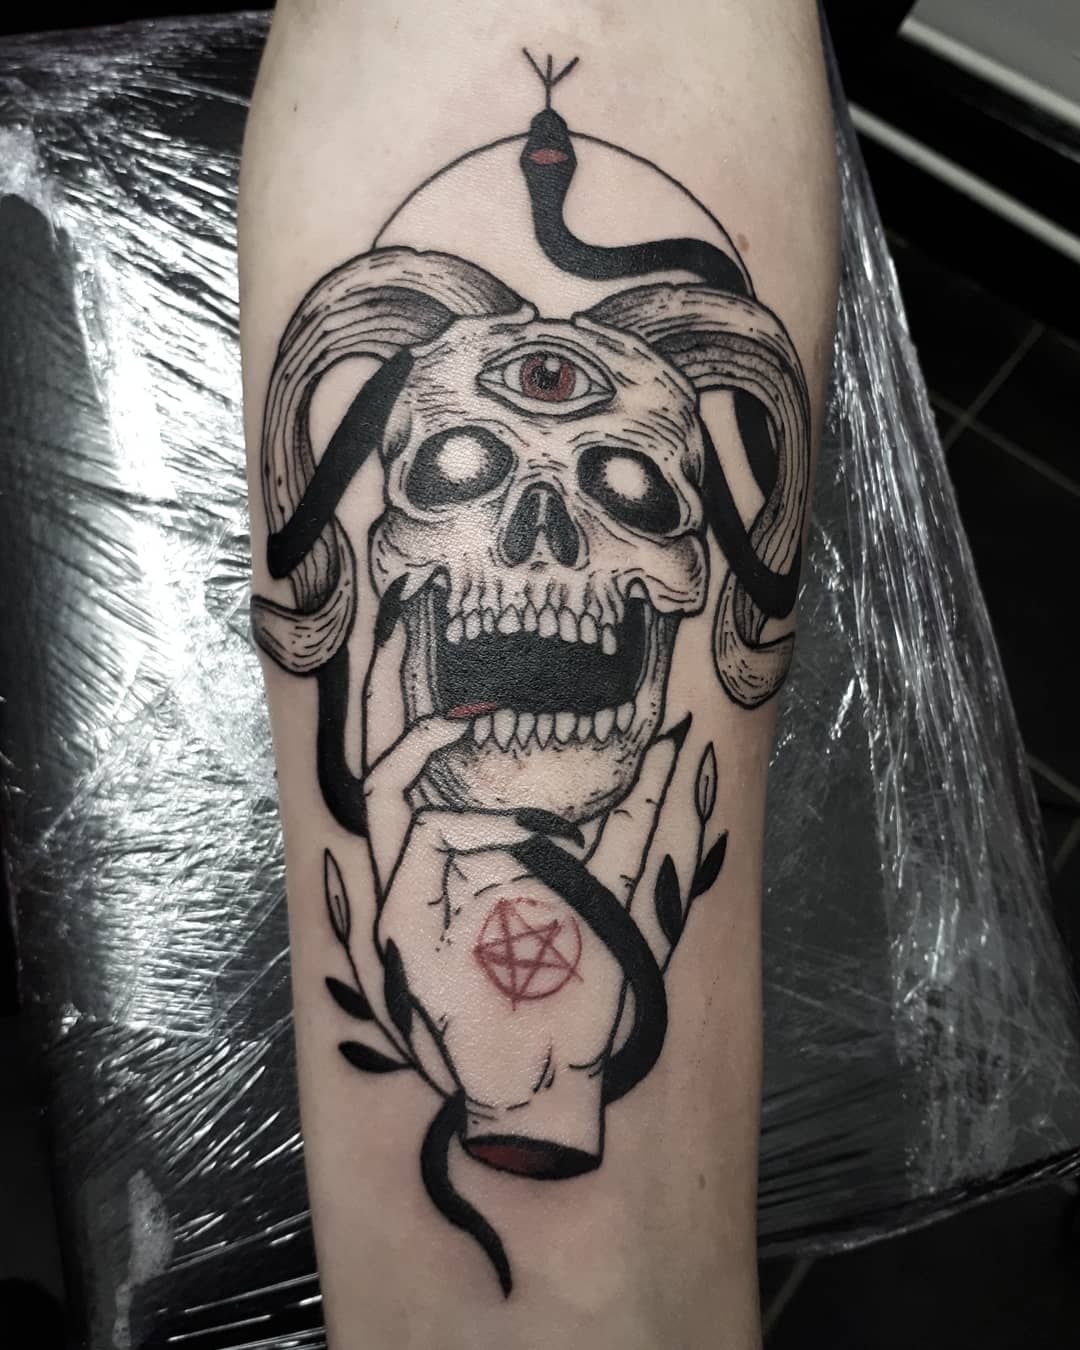 Tattoo uploaded by Kamlen Cruse  Twin skeletons inspired by Ruby Da Cherry  from uicideboy  Tattoodo